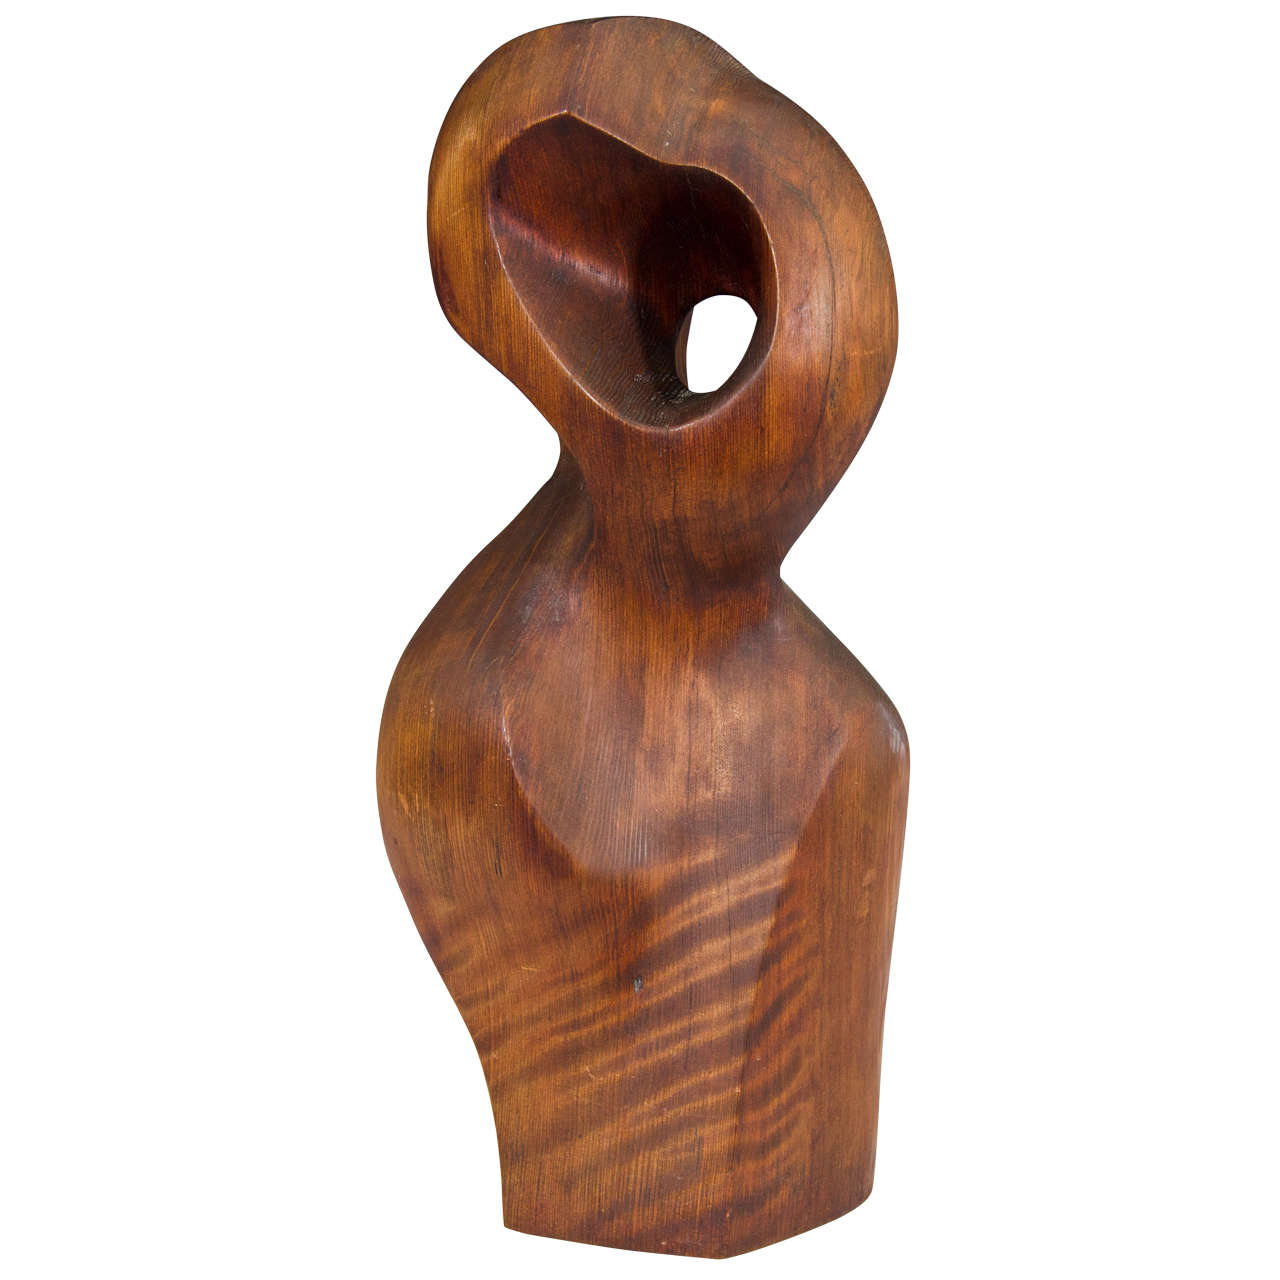 Carved Wood Sculpture of a Female Figure by Artist Jean Sampson